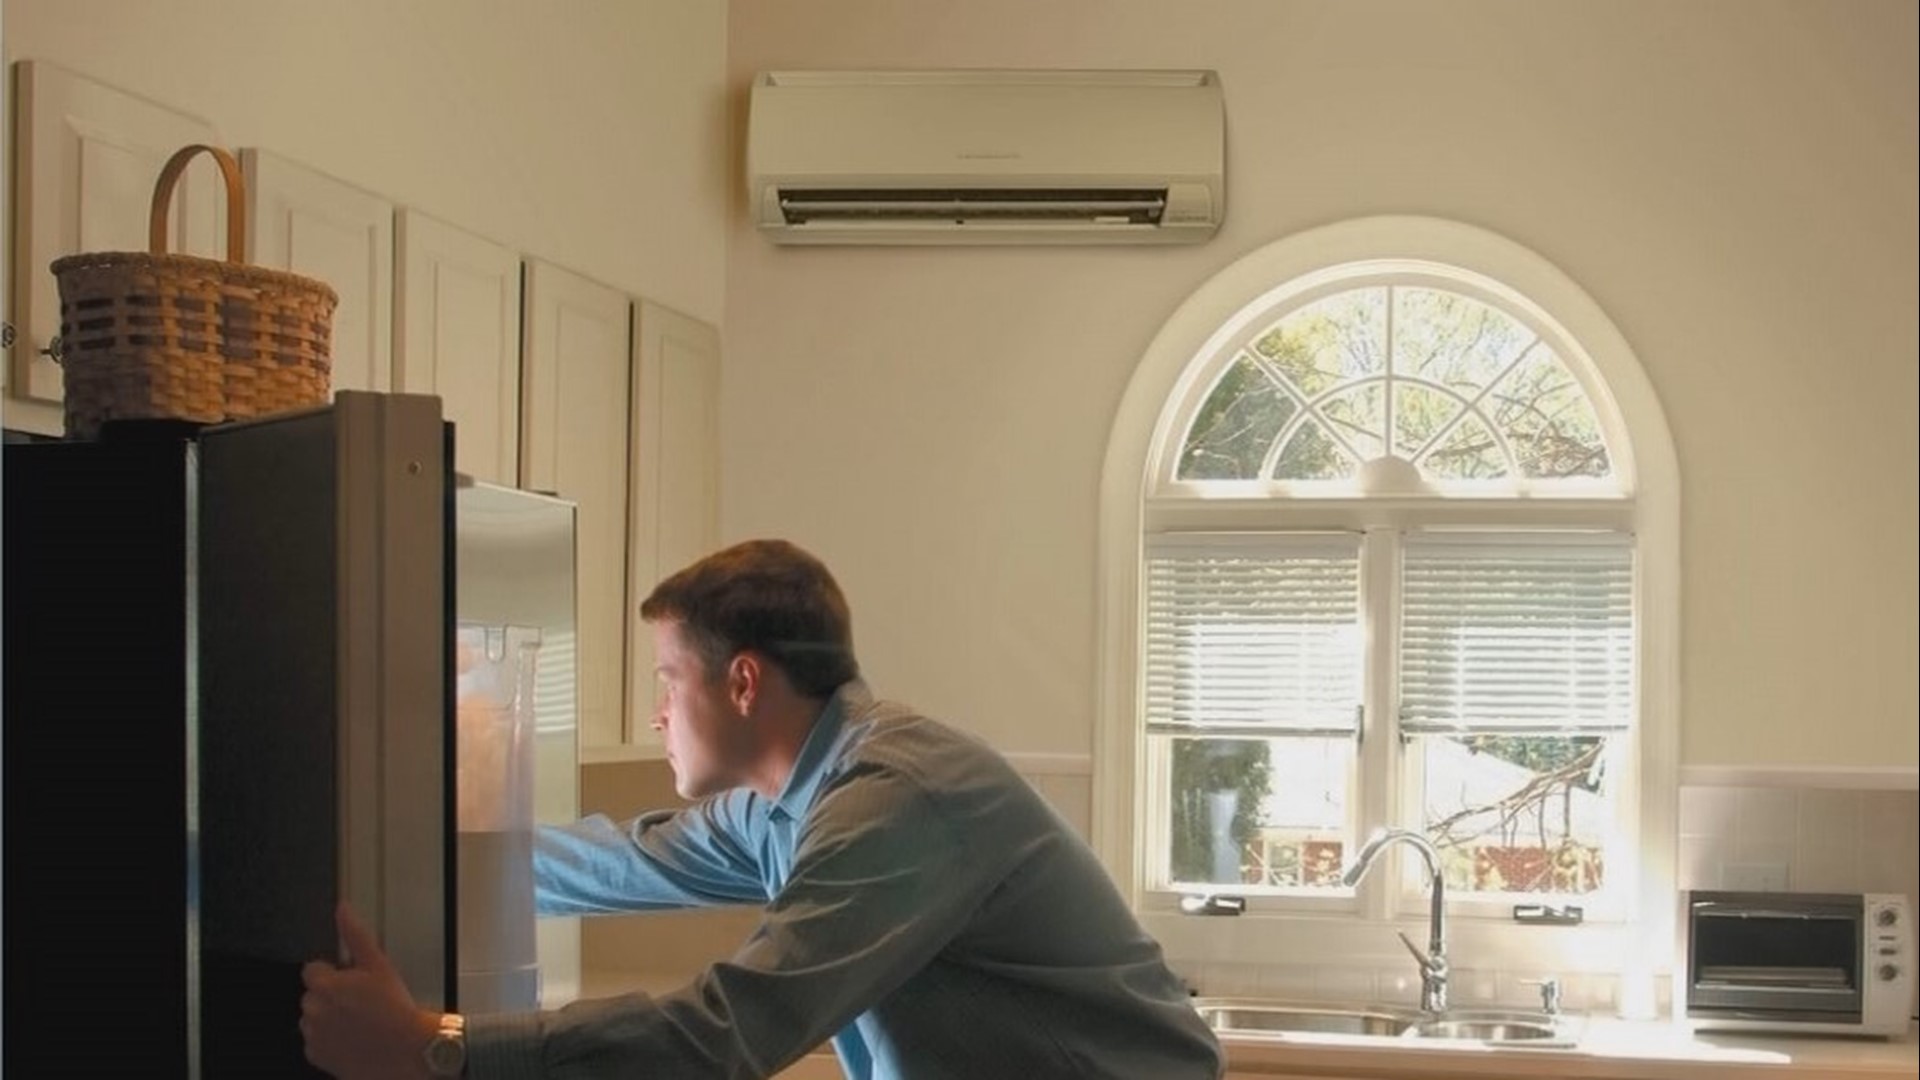 Curtis Dahl of Sundance Energy Services explains the cost-saving options to make your home more comfortable, safe, and healthy. Sponsored by Sundance Energy Services